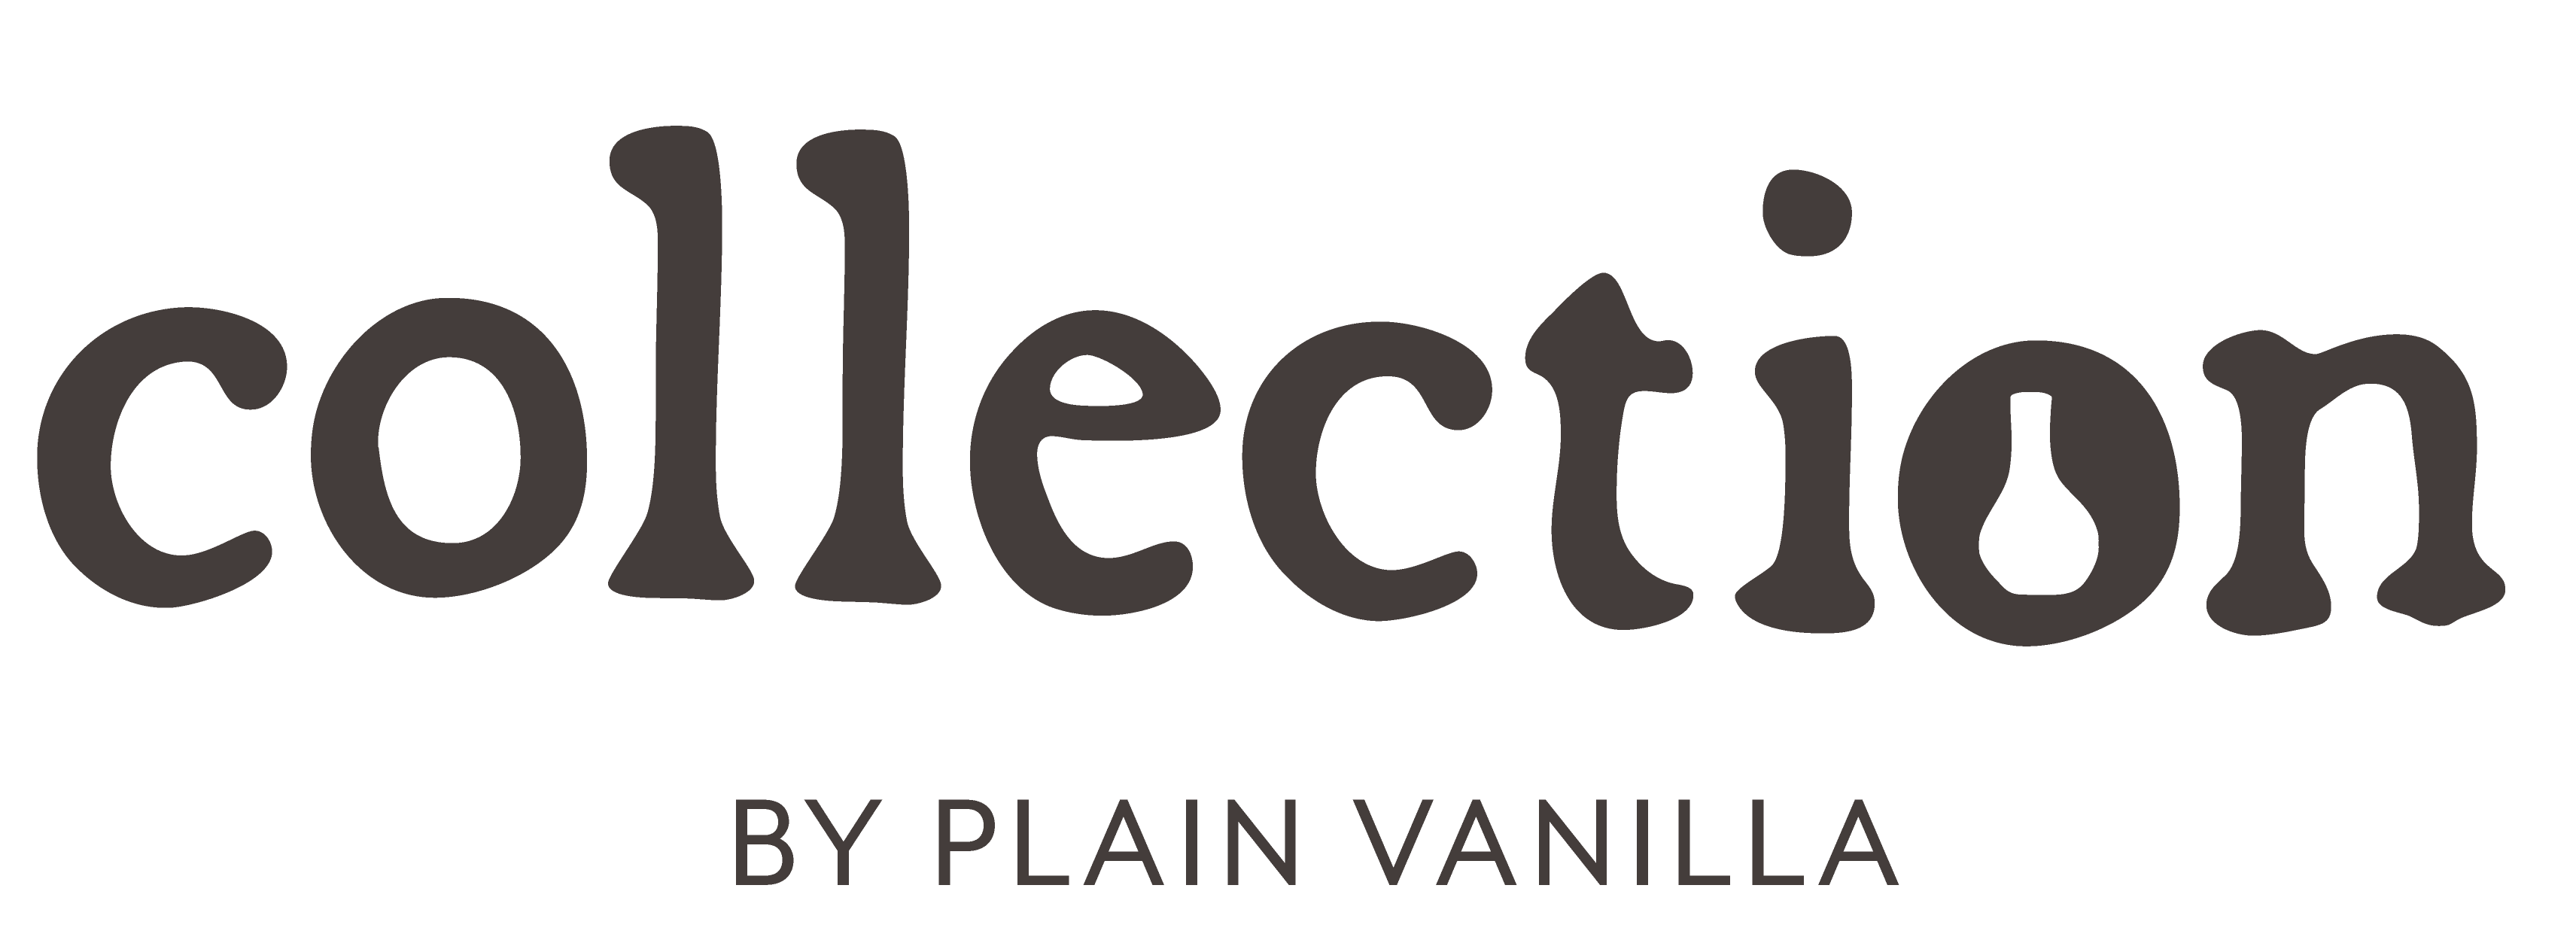 Collection by Plain Vanilla